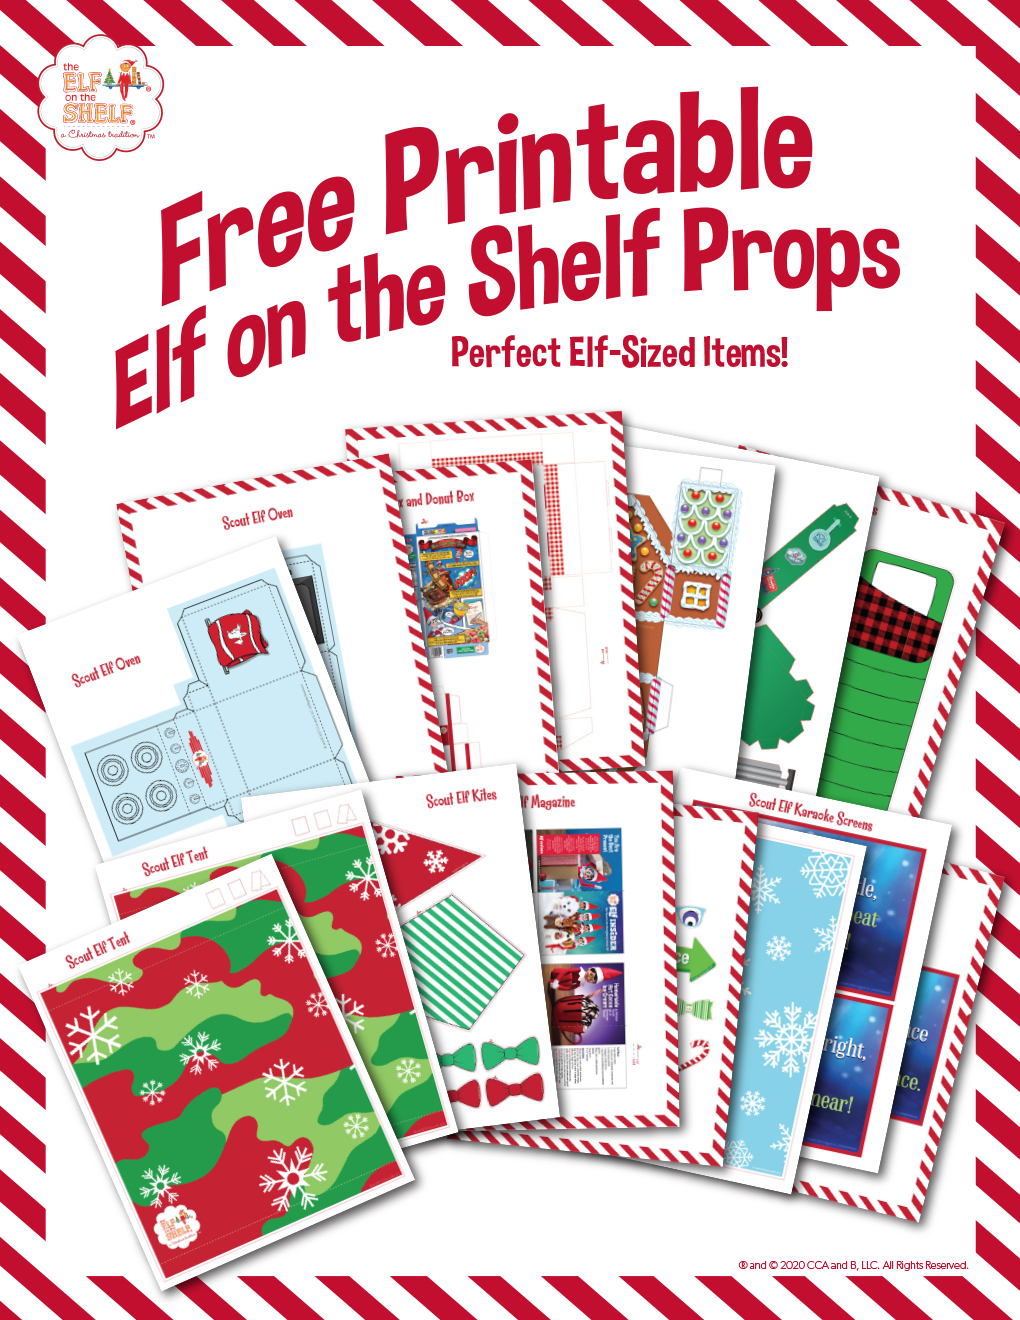 Download Free Printable Elf On The Shelf Props | The Elf On The Shelf regarding Elf On The Shelf Free Printable Props